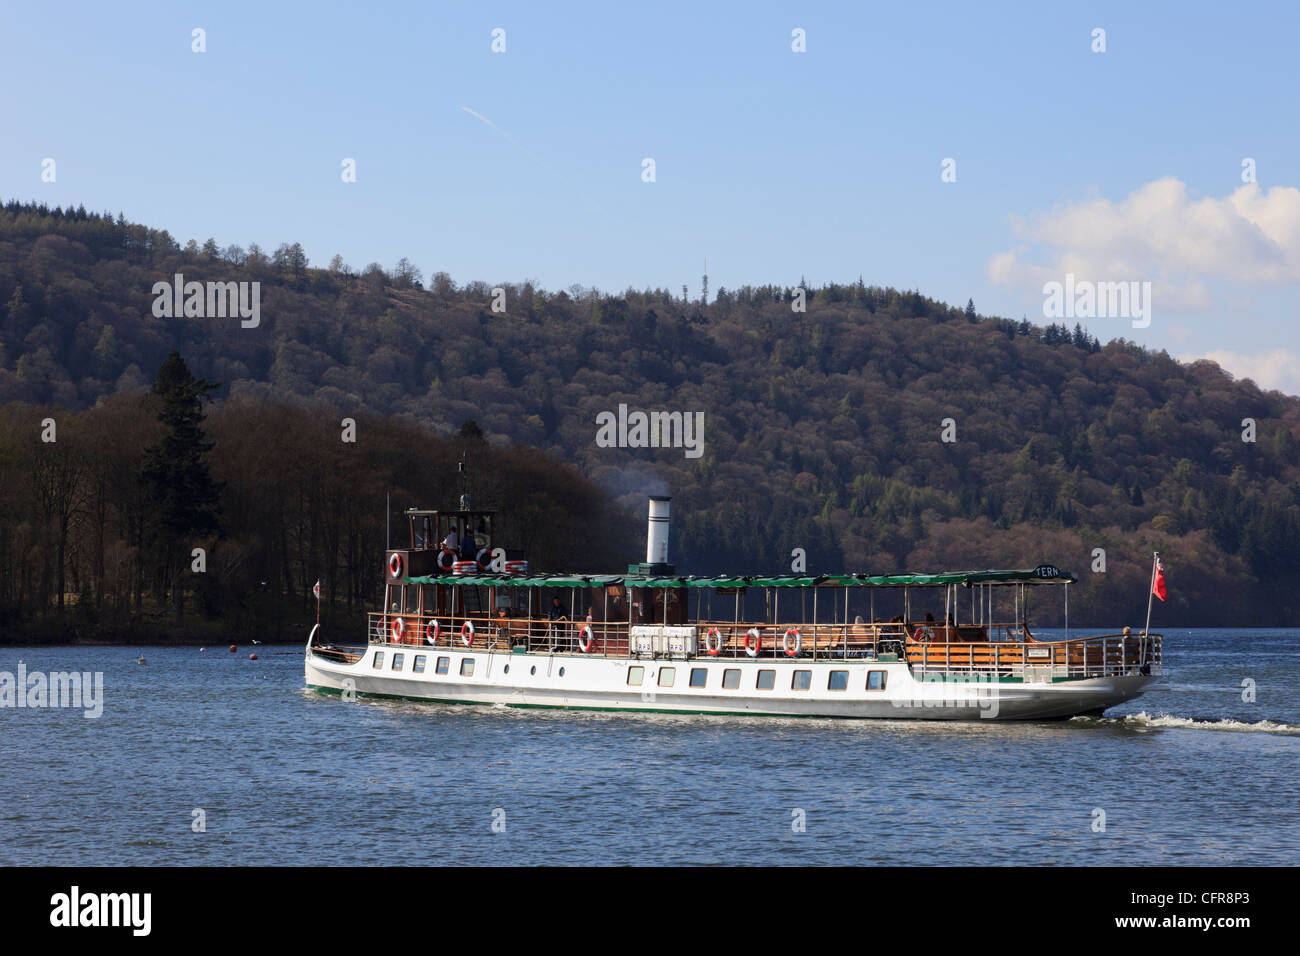 Bowness on Windermere, Cumbria, England, UK. The Tern historic sightseeing cruise boat in the Lake District National Park Stock Photo